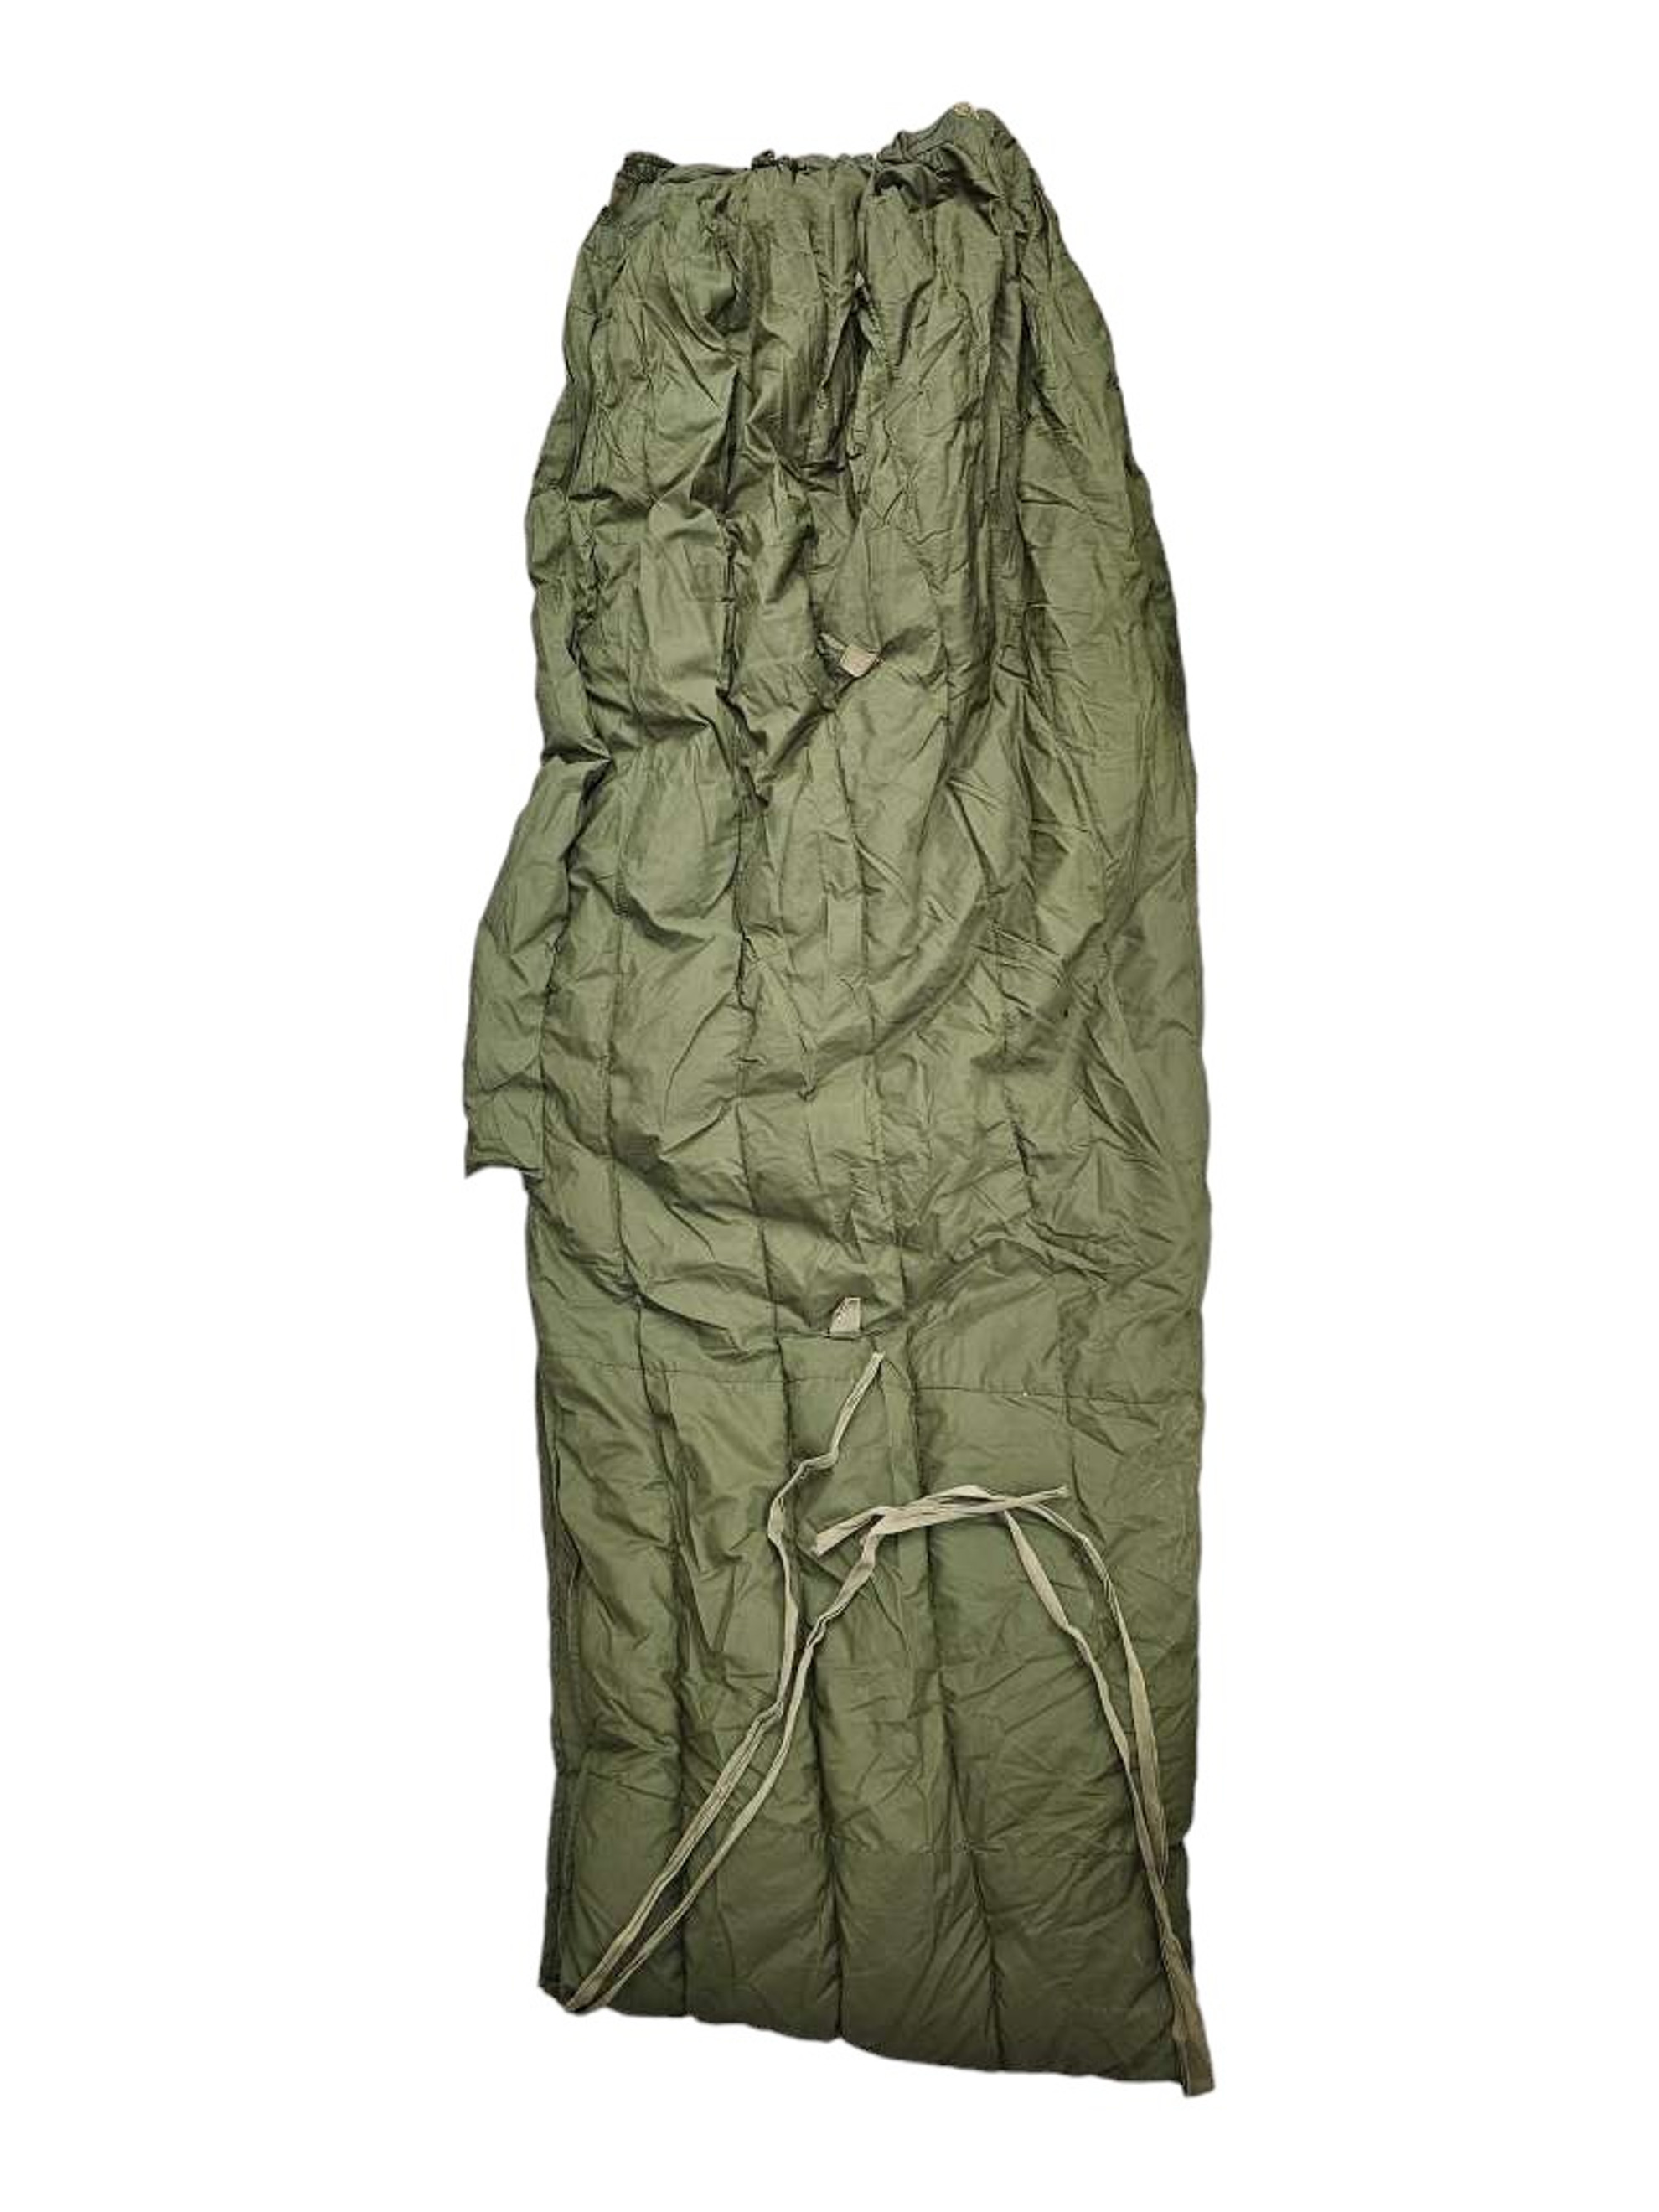 Canadian Armed Forces 1960's Inner Sleeping Bag 